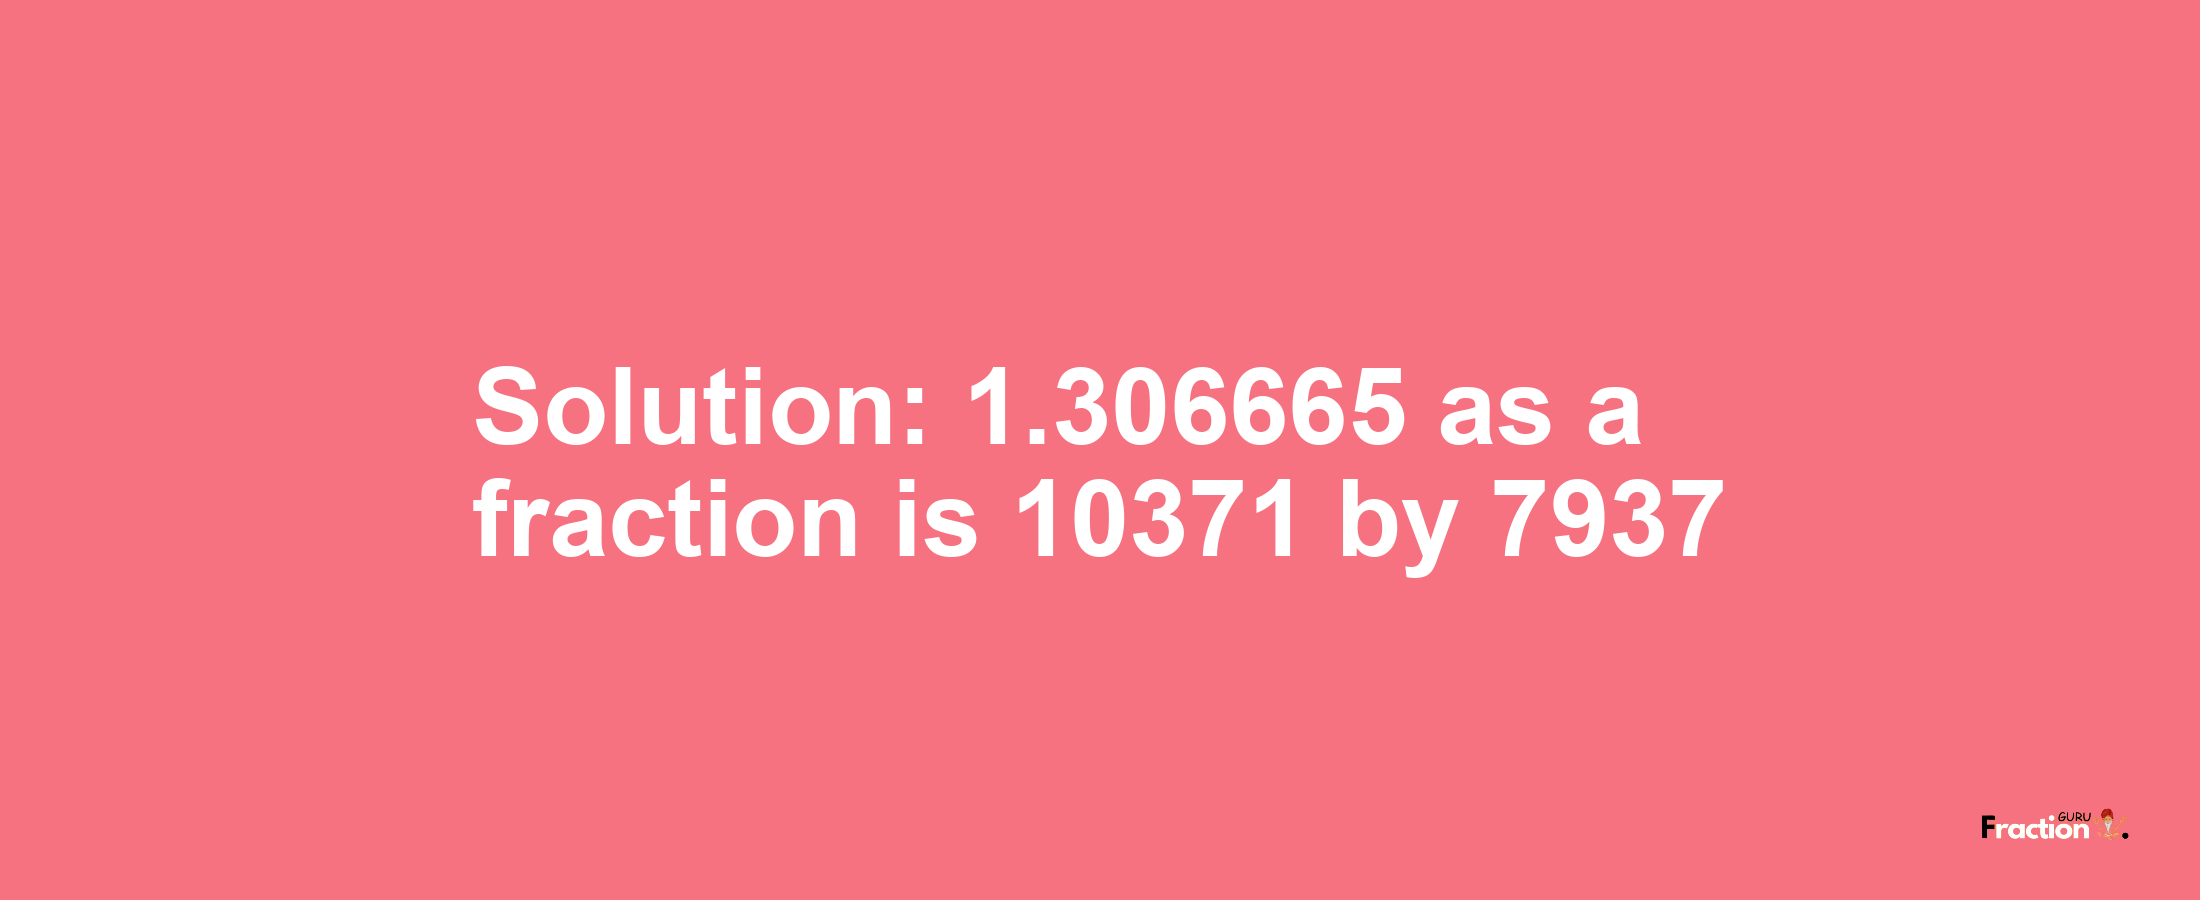 Solution:1.306665 as a fraction is 10371/7937